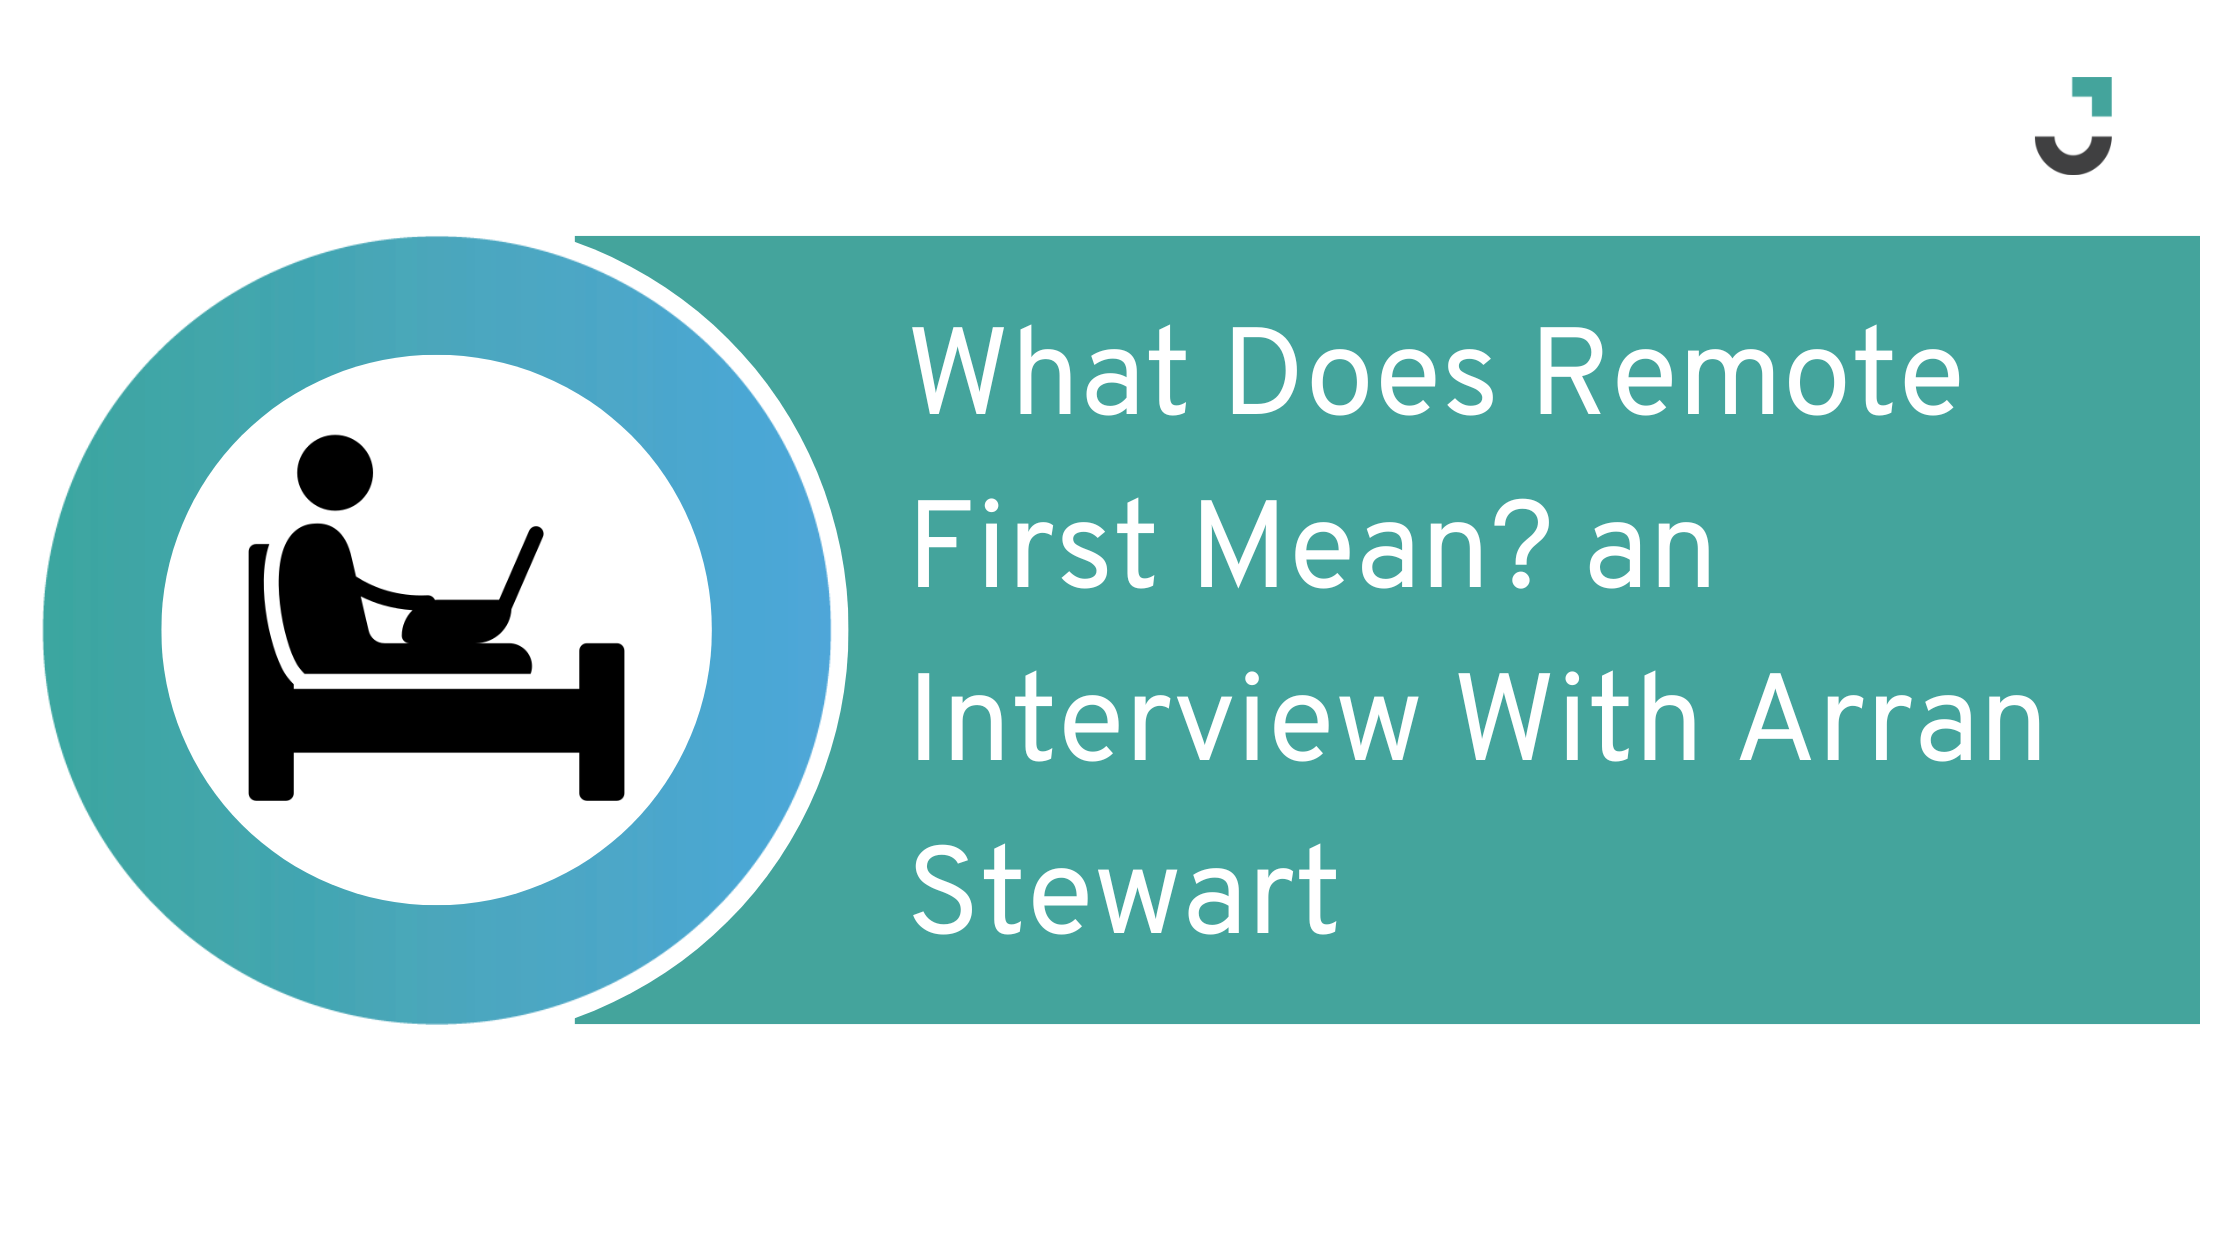 What Does Remote First Mean? an Interview With Arran Stewart